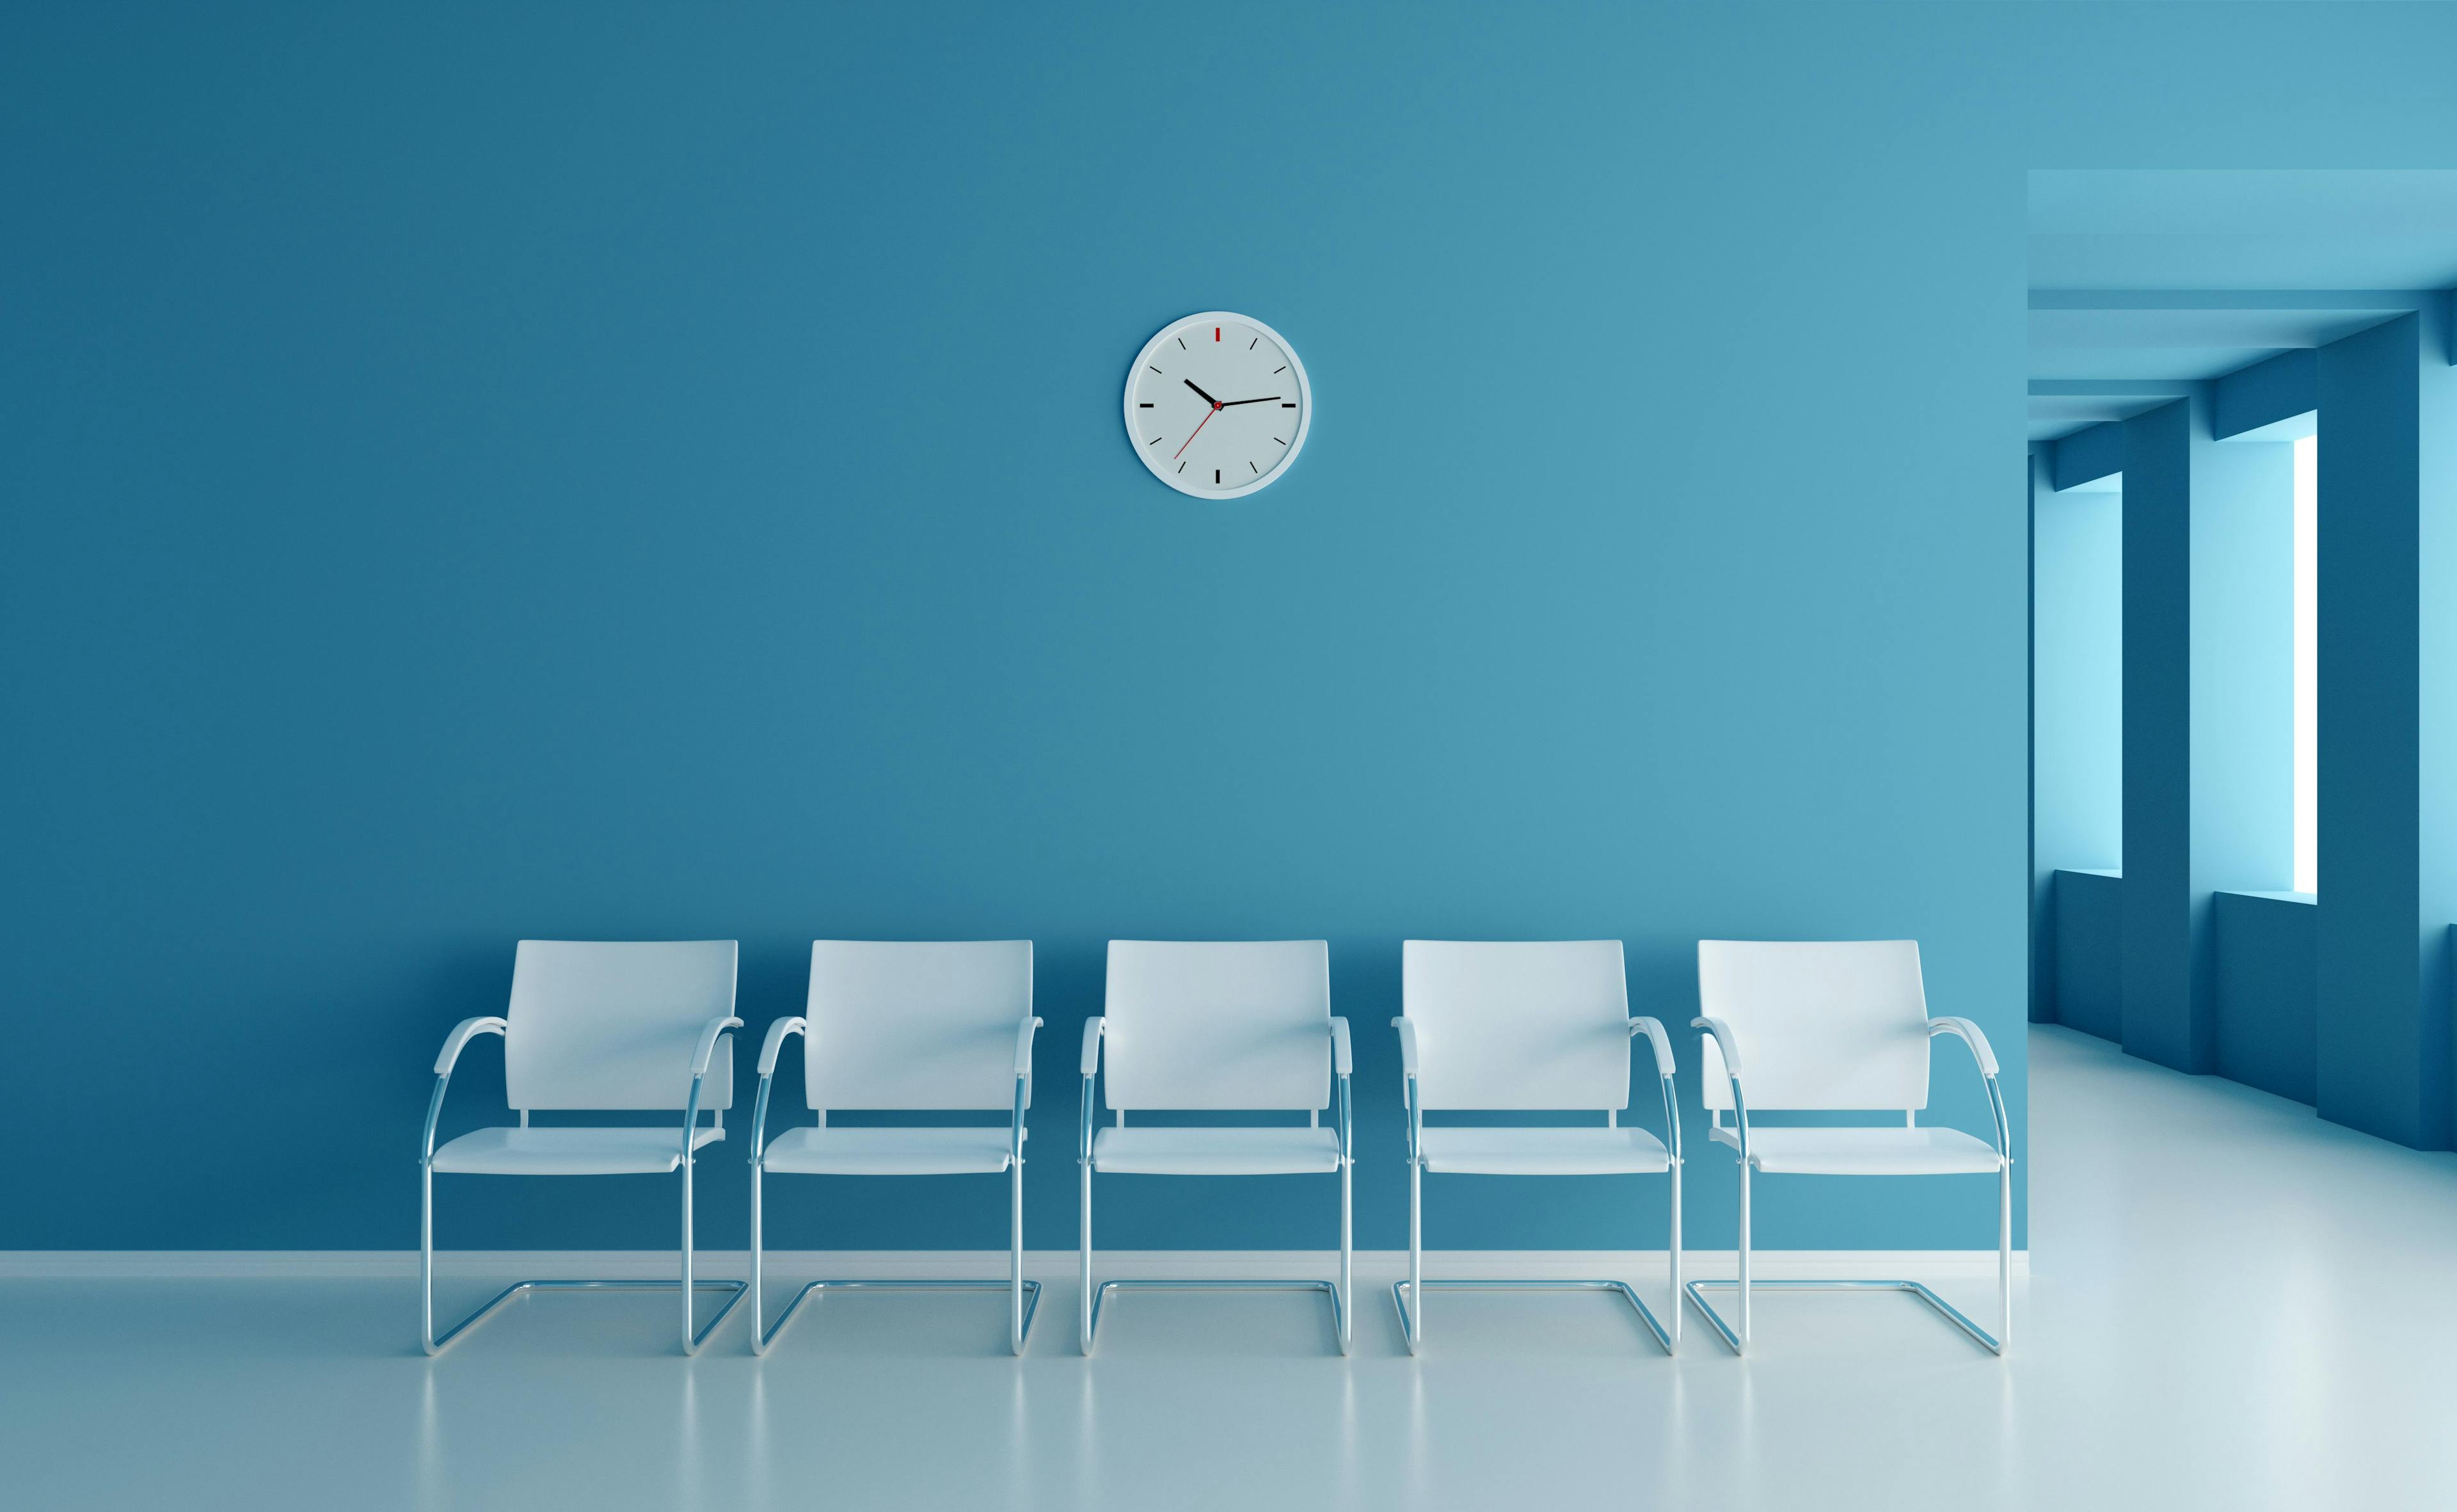 Waiting area in a clinic | Image credit: concept w - stock.adobe.com